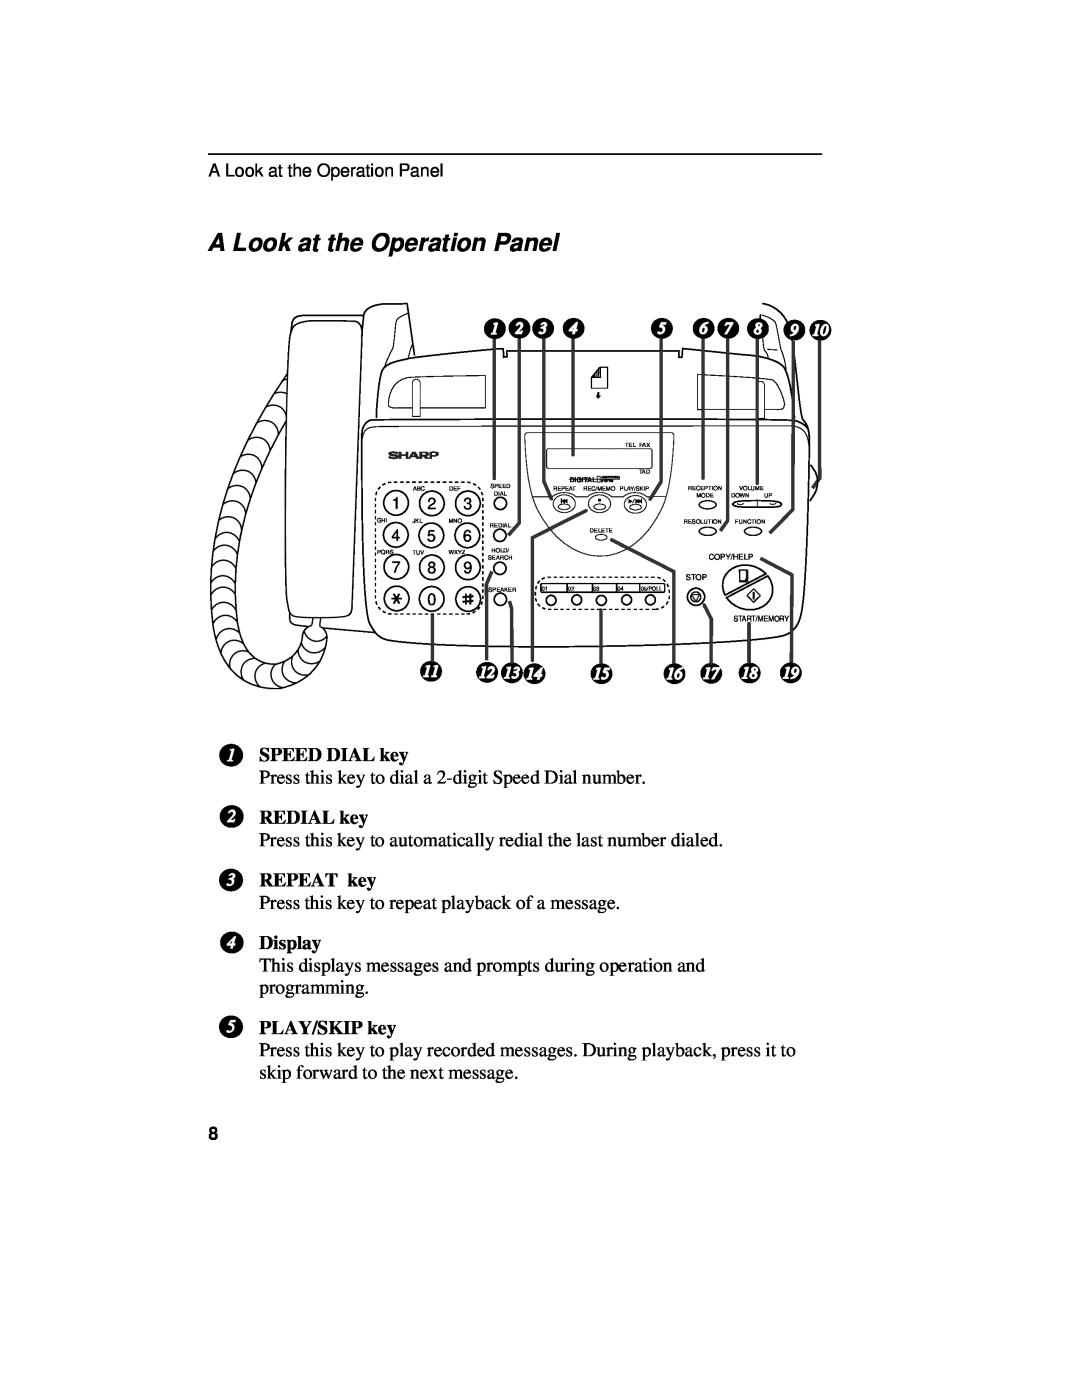 Sharp UX-460 operation manual A Look at the Operation Panel, SPEED DIAL key, REDIAL key, REPEAT key, Display, PLAY/SKIP key 